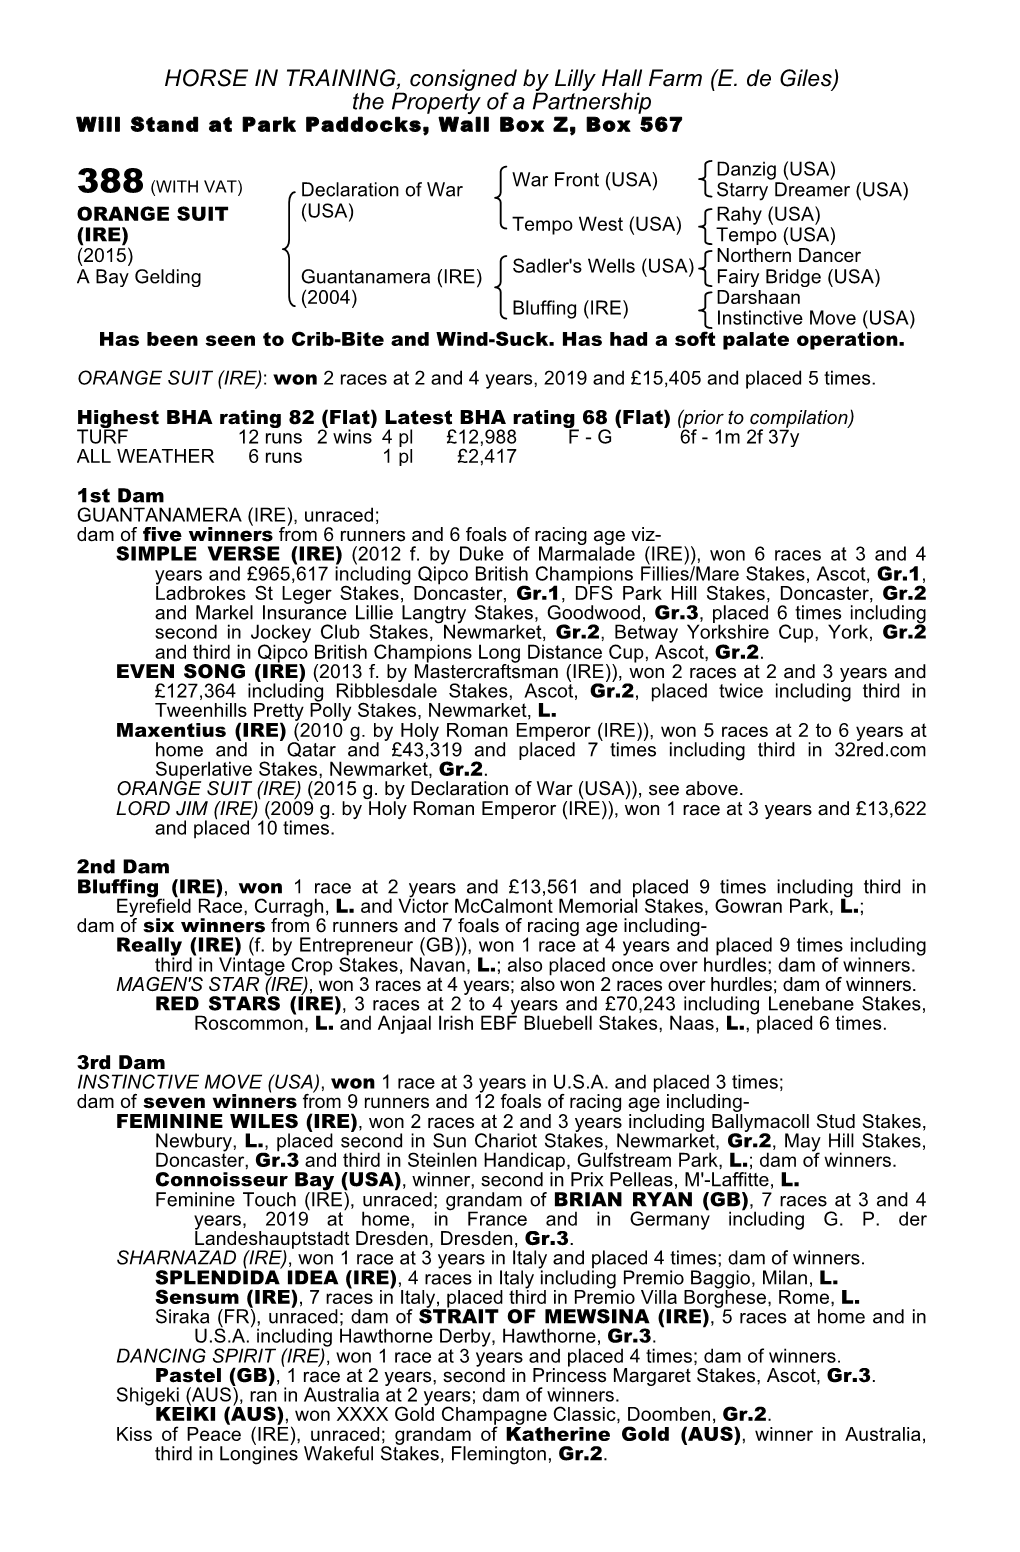 HORSE in TRAINING, Consigned by Lilly Hall Farm (E. De Giles) the Property of a Partnership Will Stand at Park Paddocks, Wall Box Z, Box 567